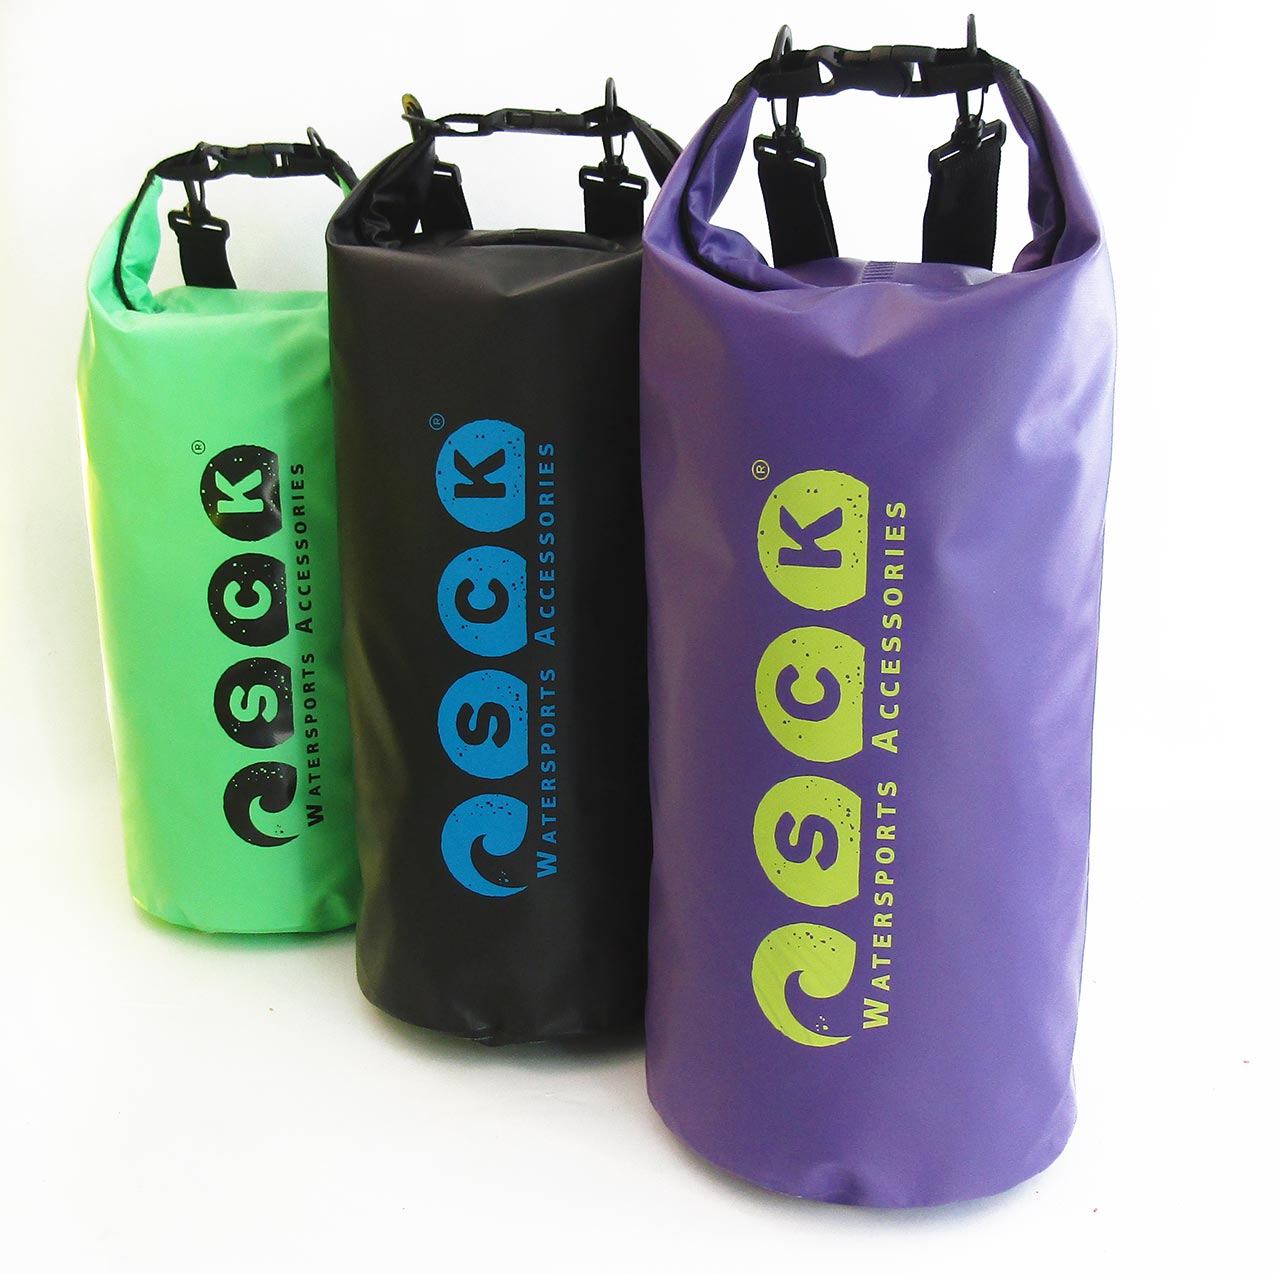 SCK 20L Dry bags in 3 colors to choose